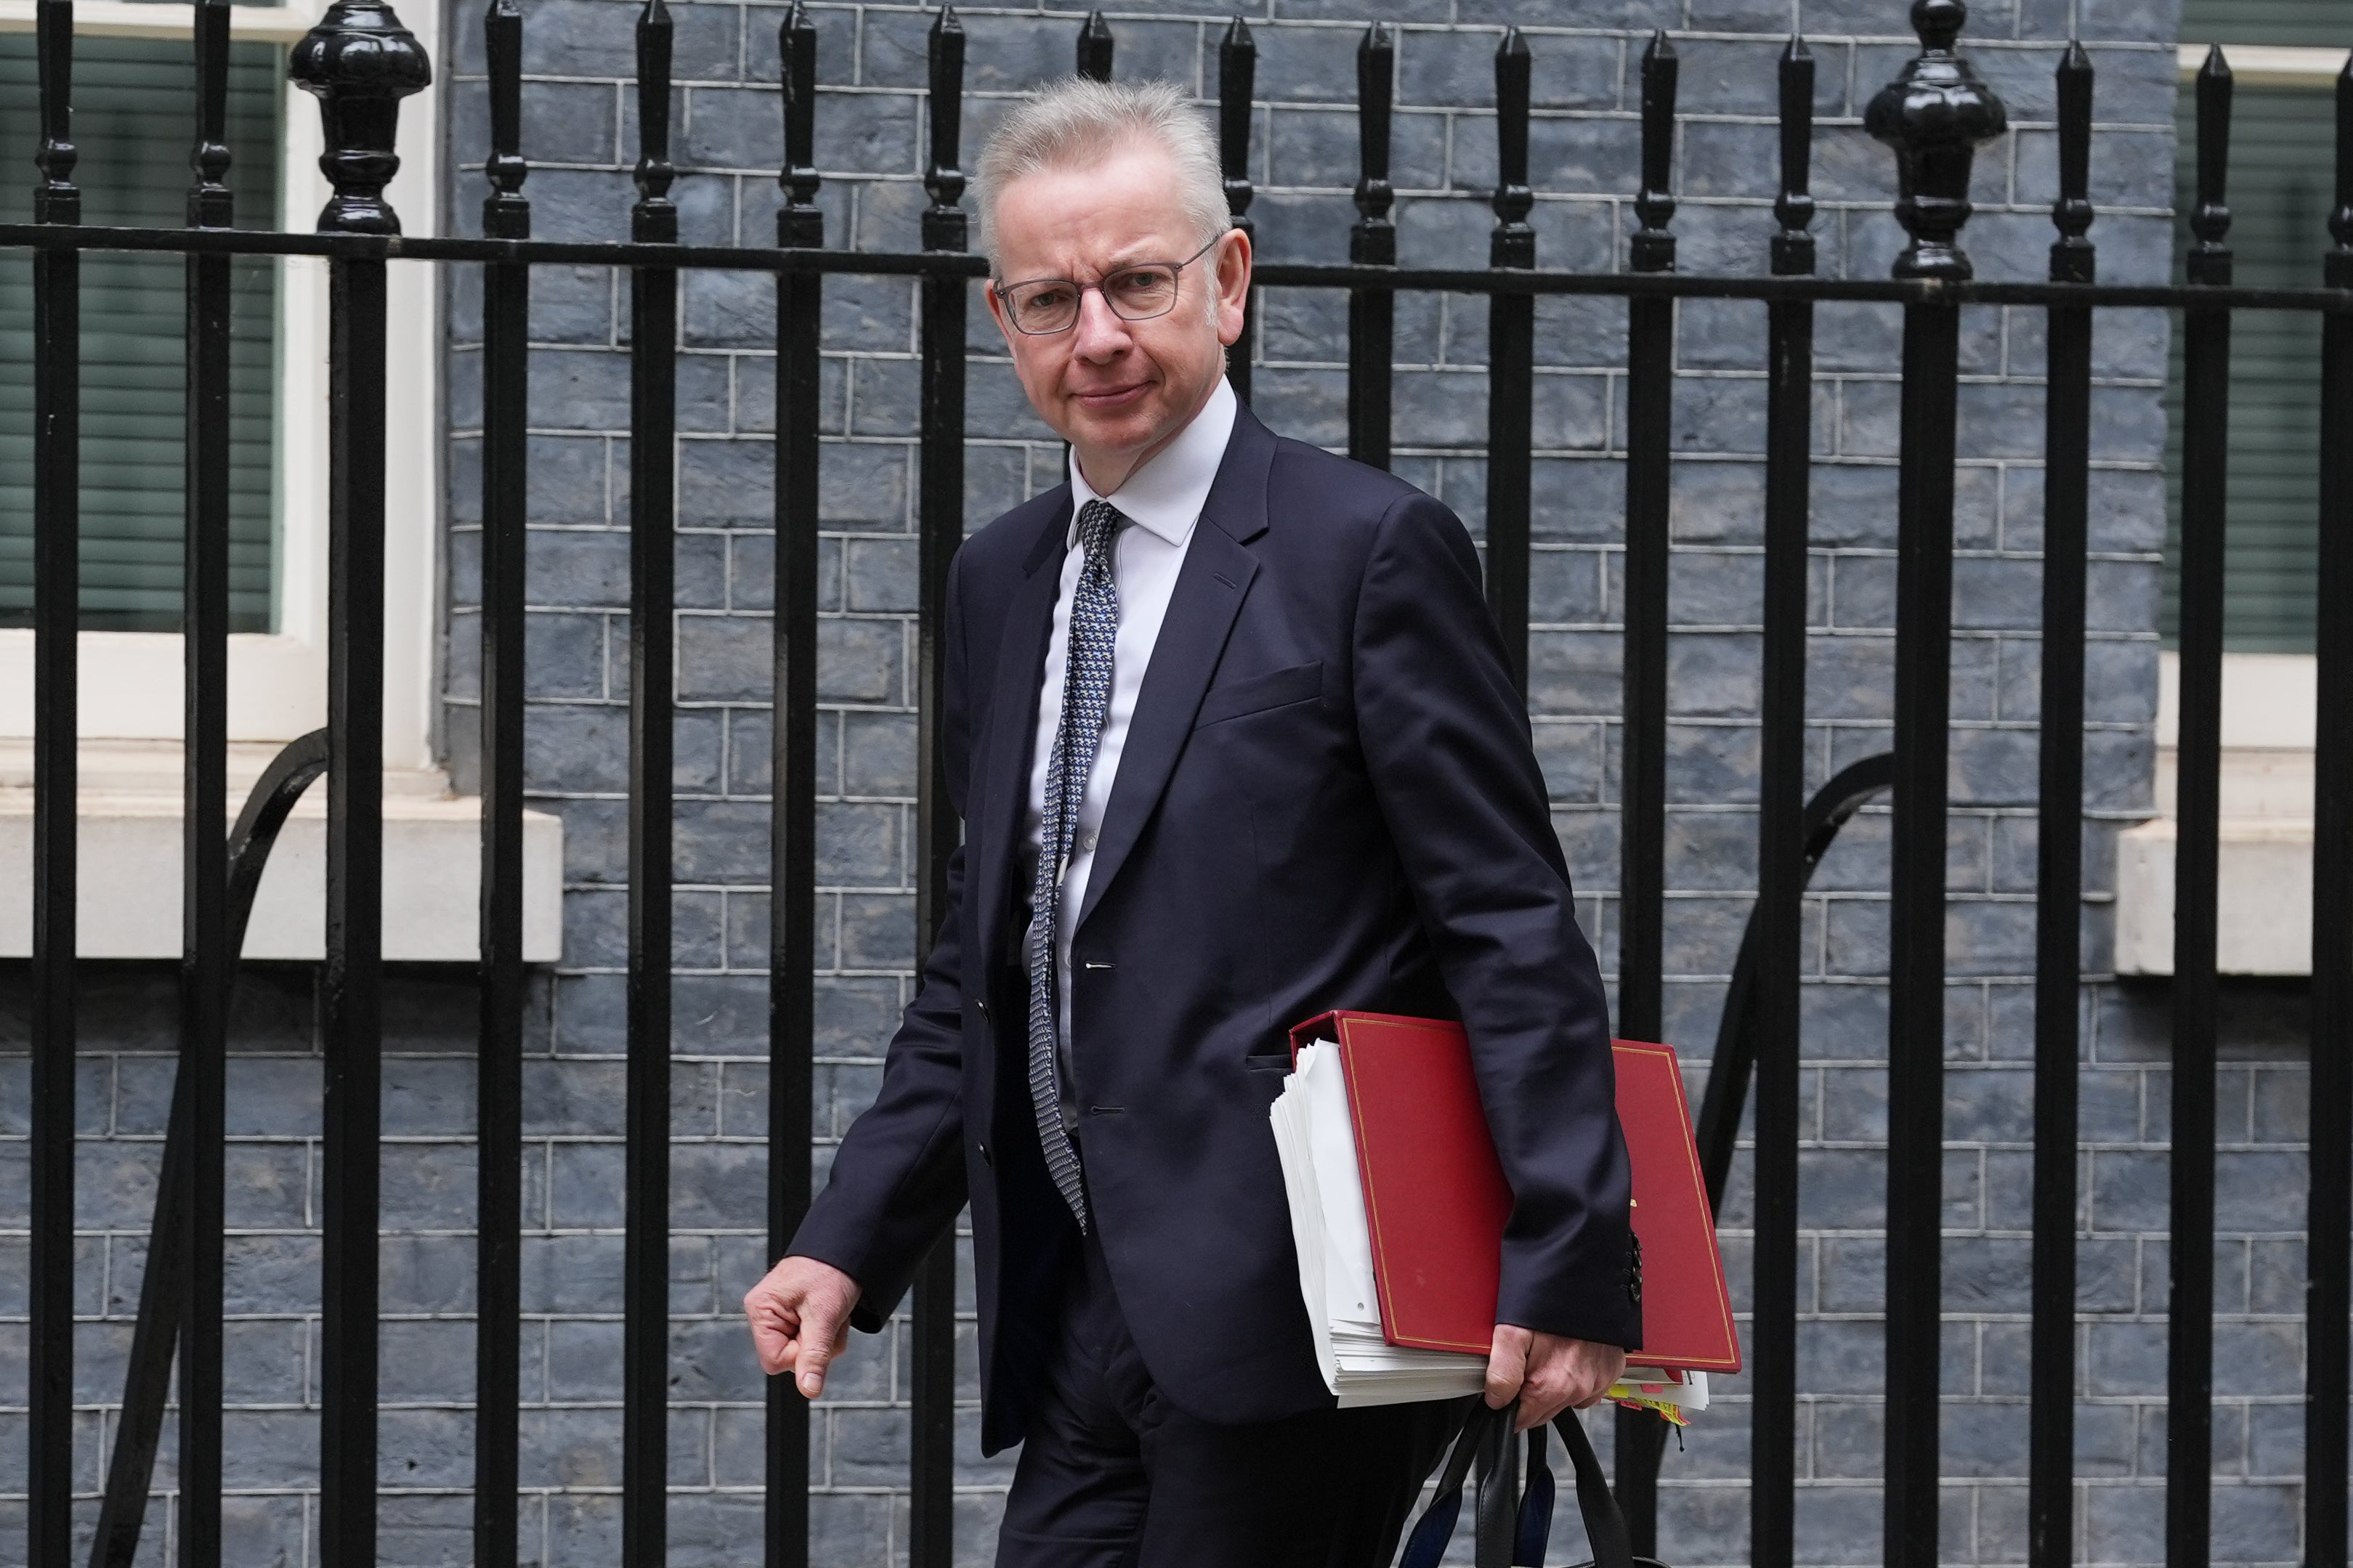 Michael Gove’s seat is vulnerable